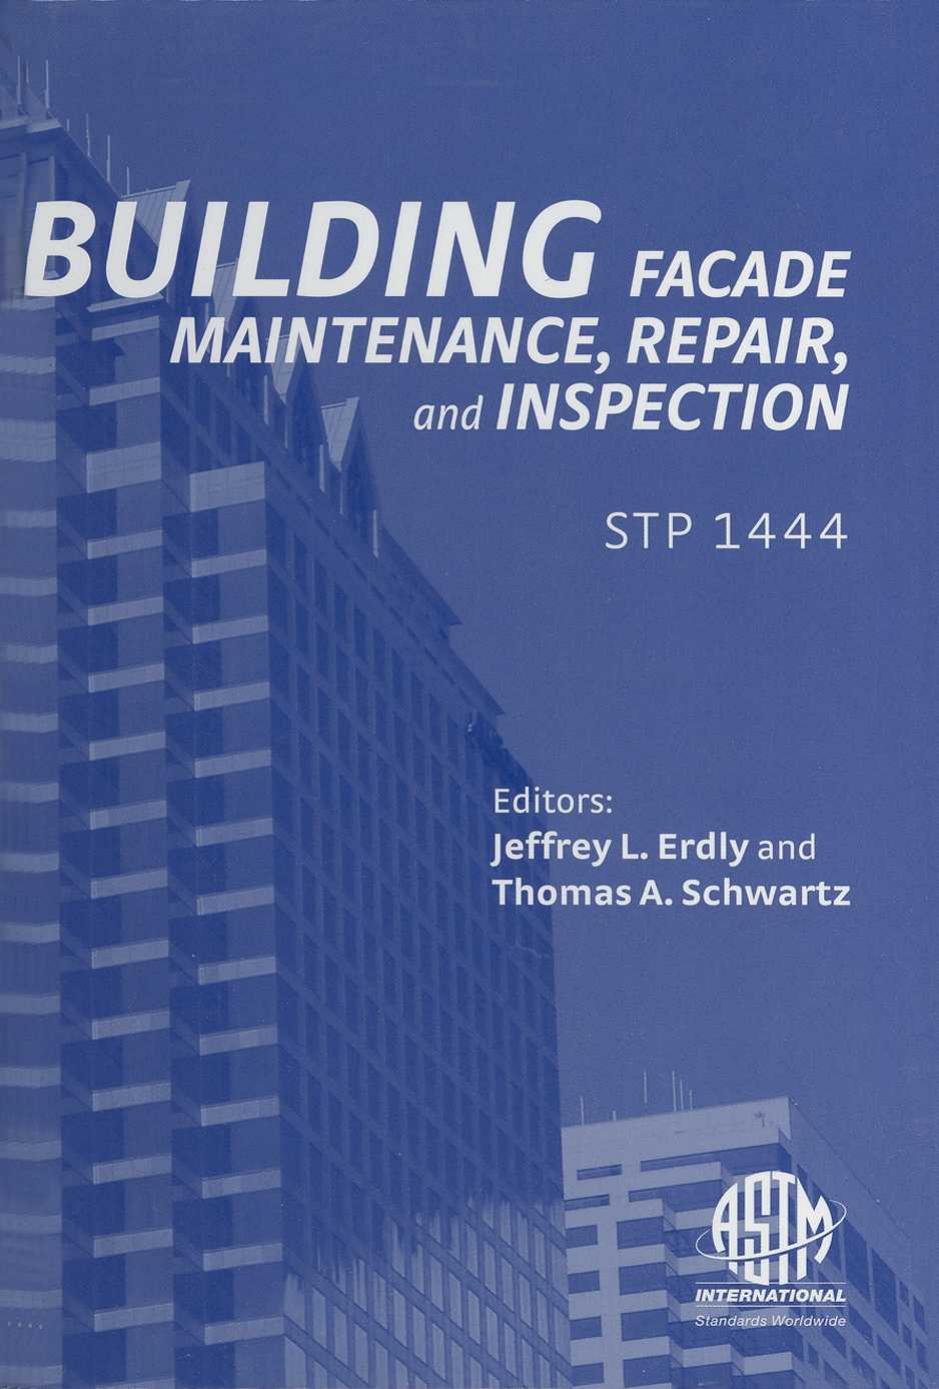 Building Facade Maintenance, Repair, and Inspection 2004